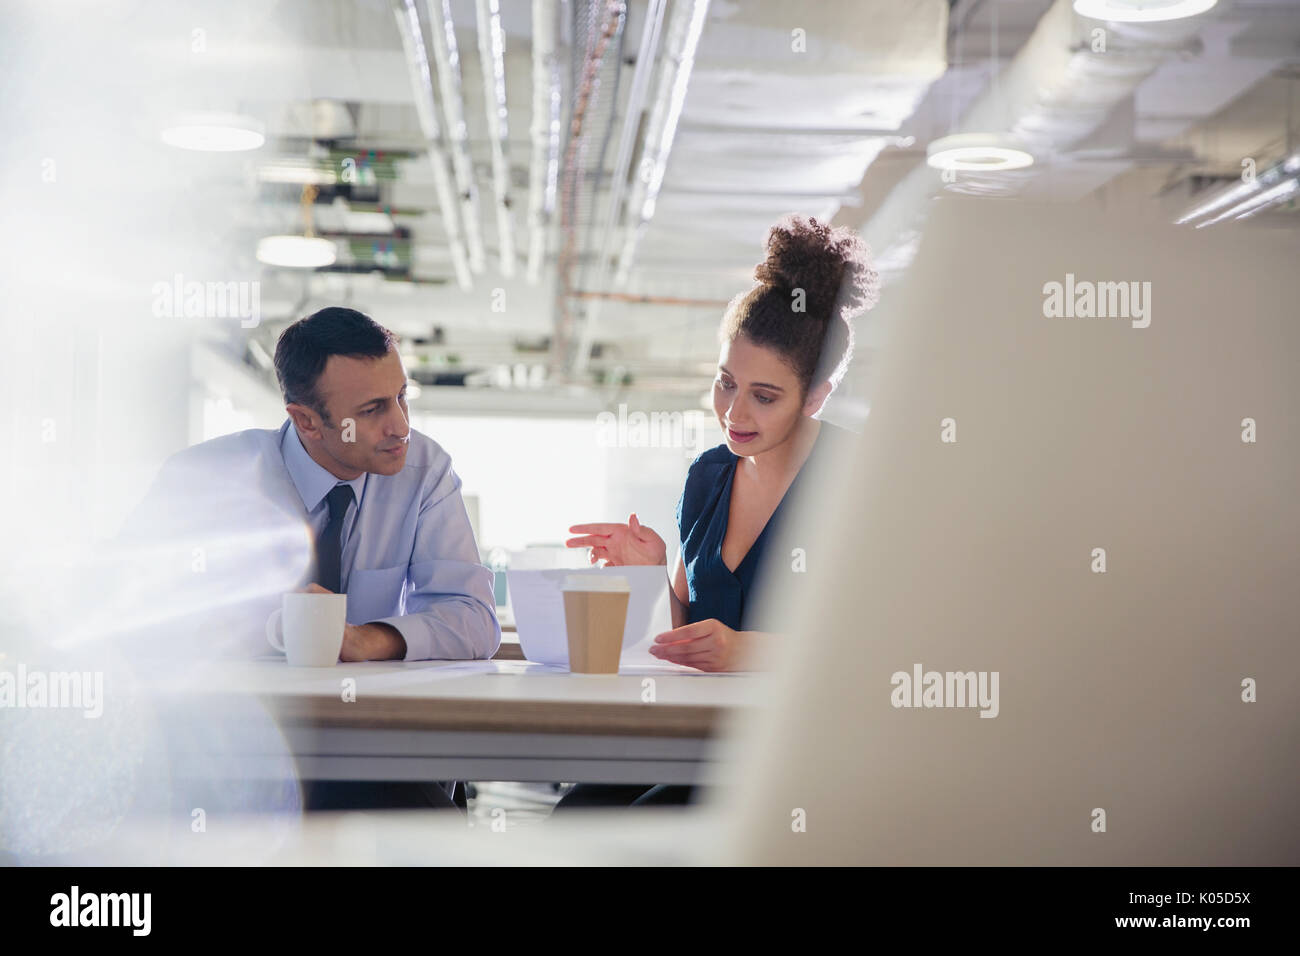 Businessman and businesswoman discussing paperwork in office meeting Stock Photo